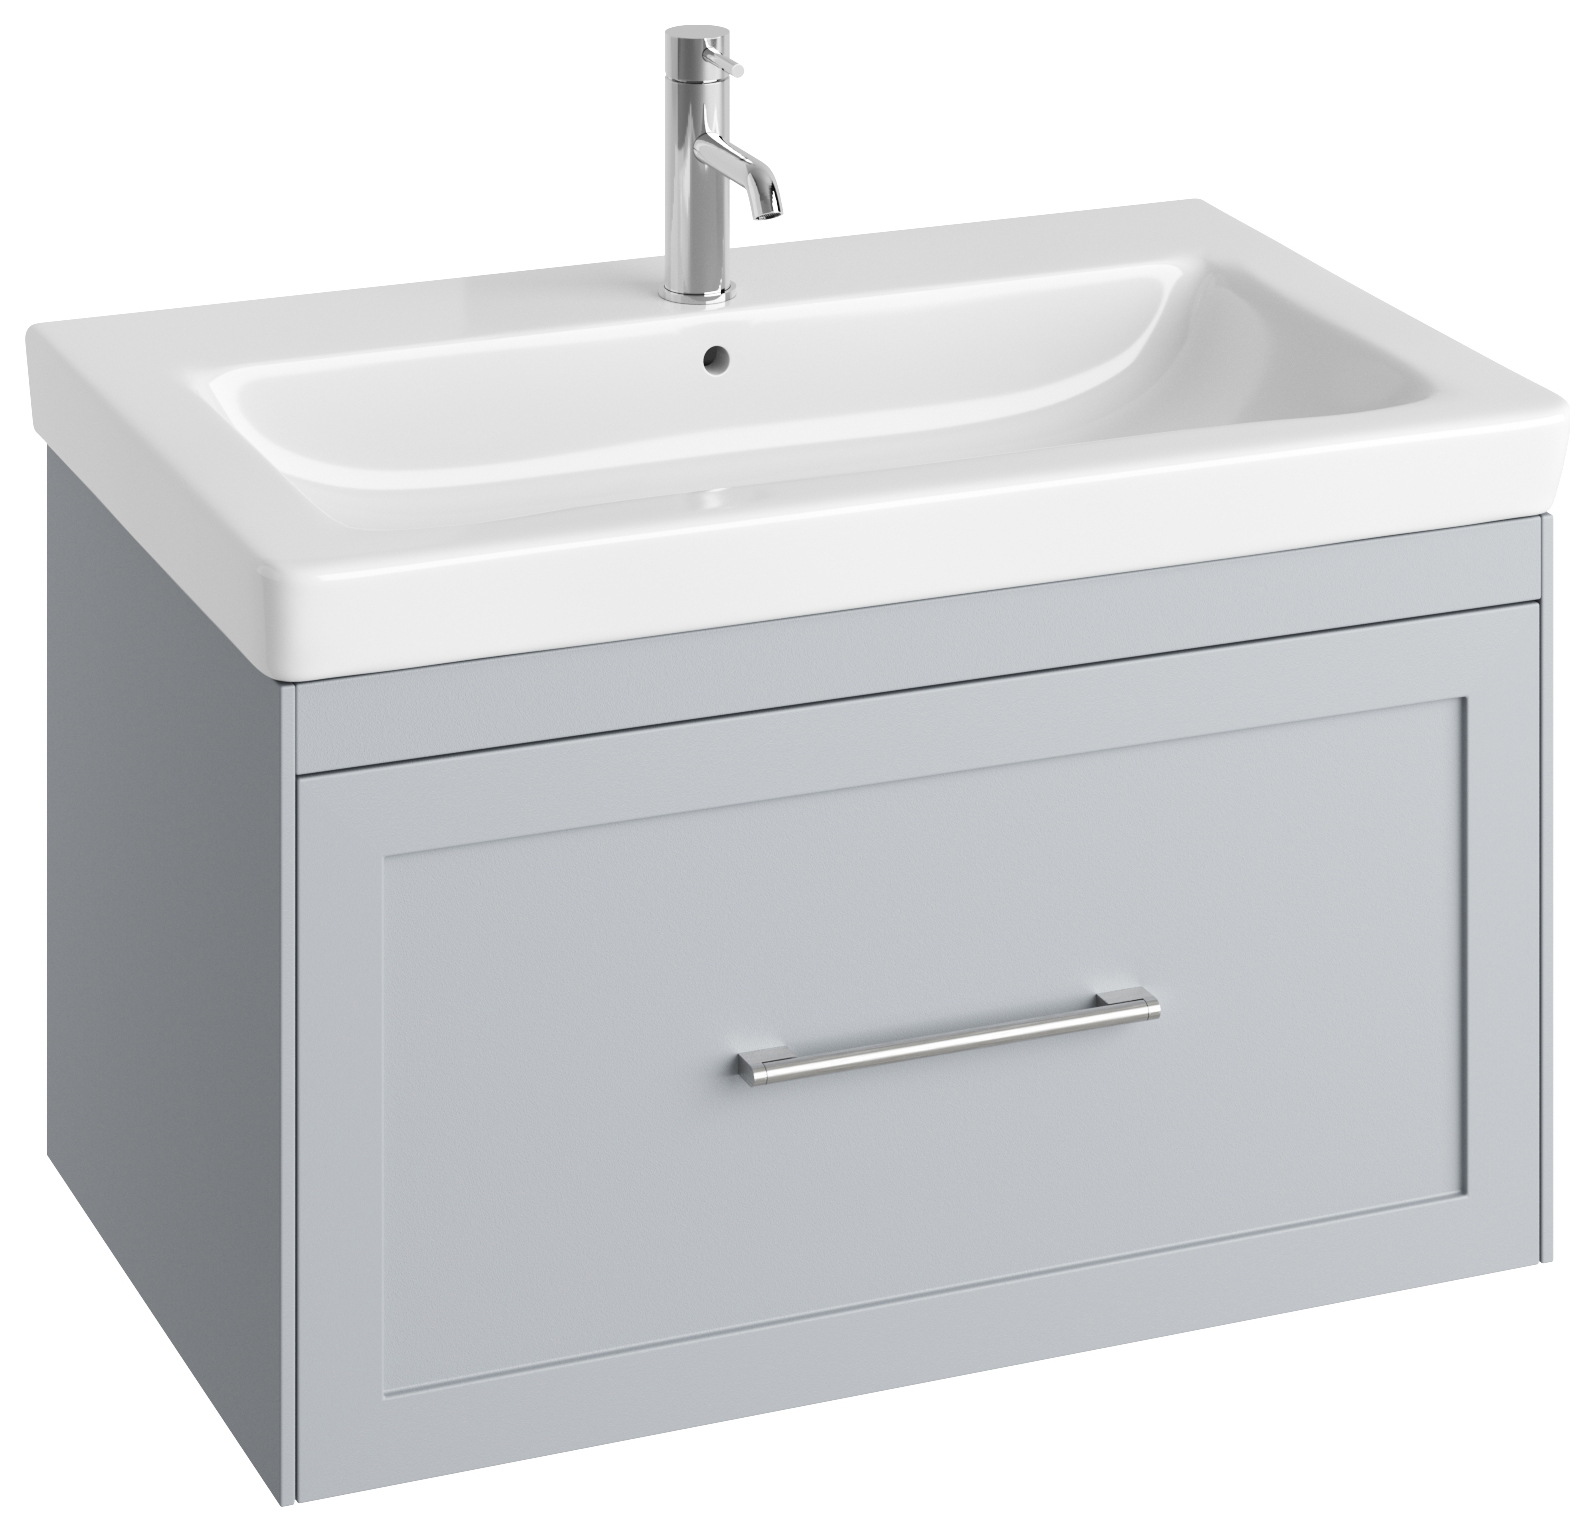 Image of Abacus Concept Stone Grey Shaker Wall Hung Vanity Unit & Basin - 800mm